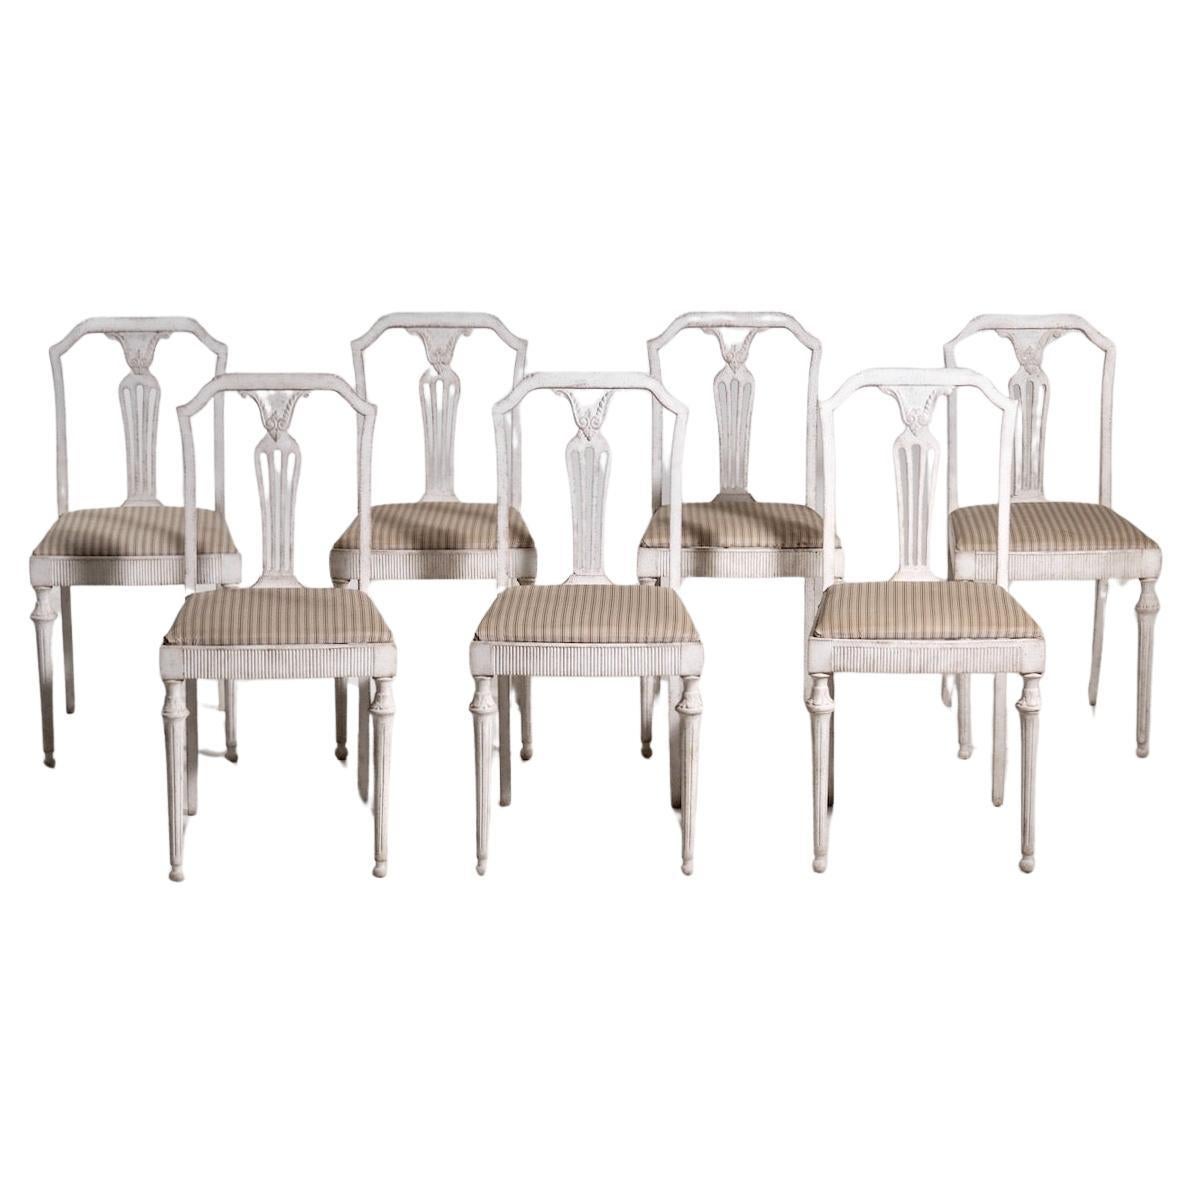 Set of seven chairs, Gustavian style, 20th C.